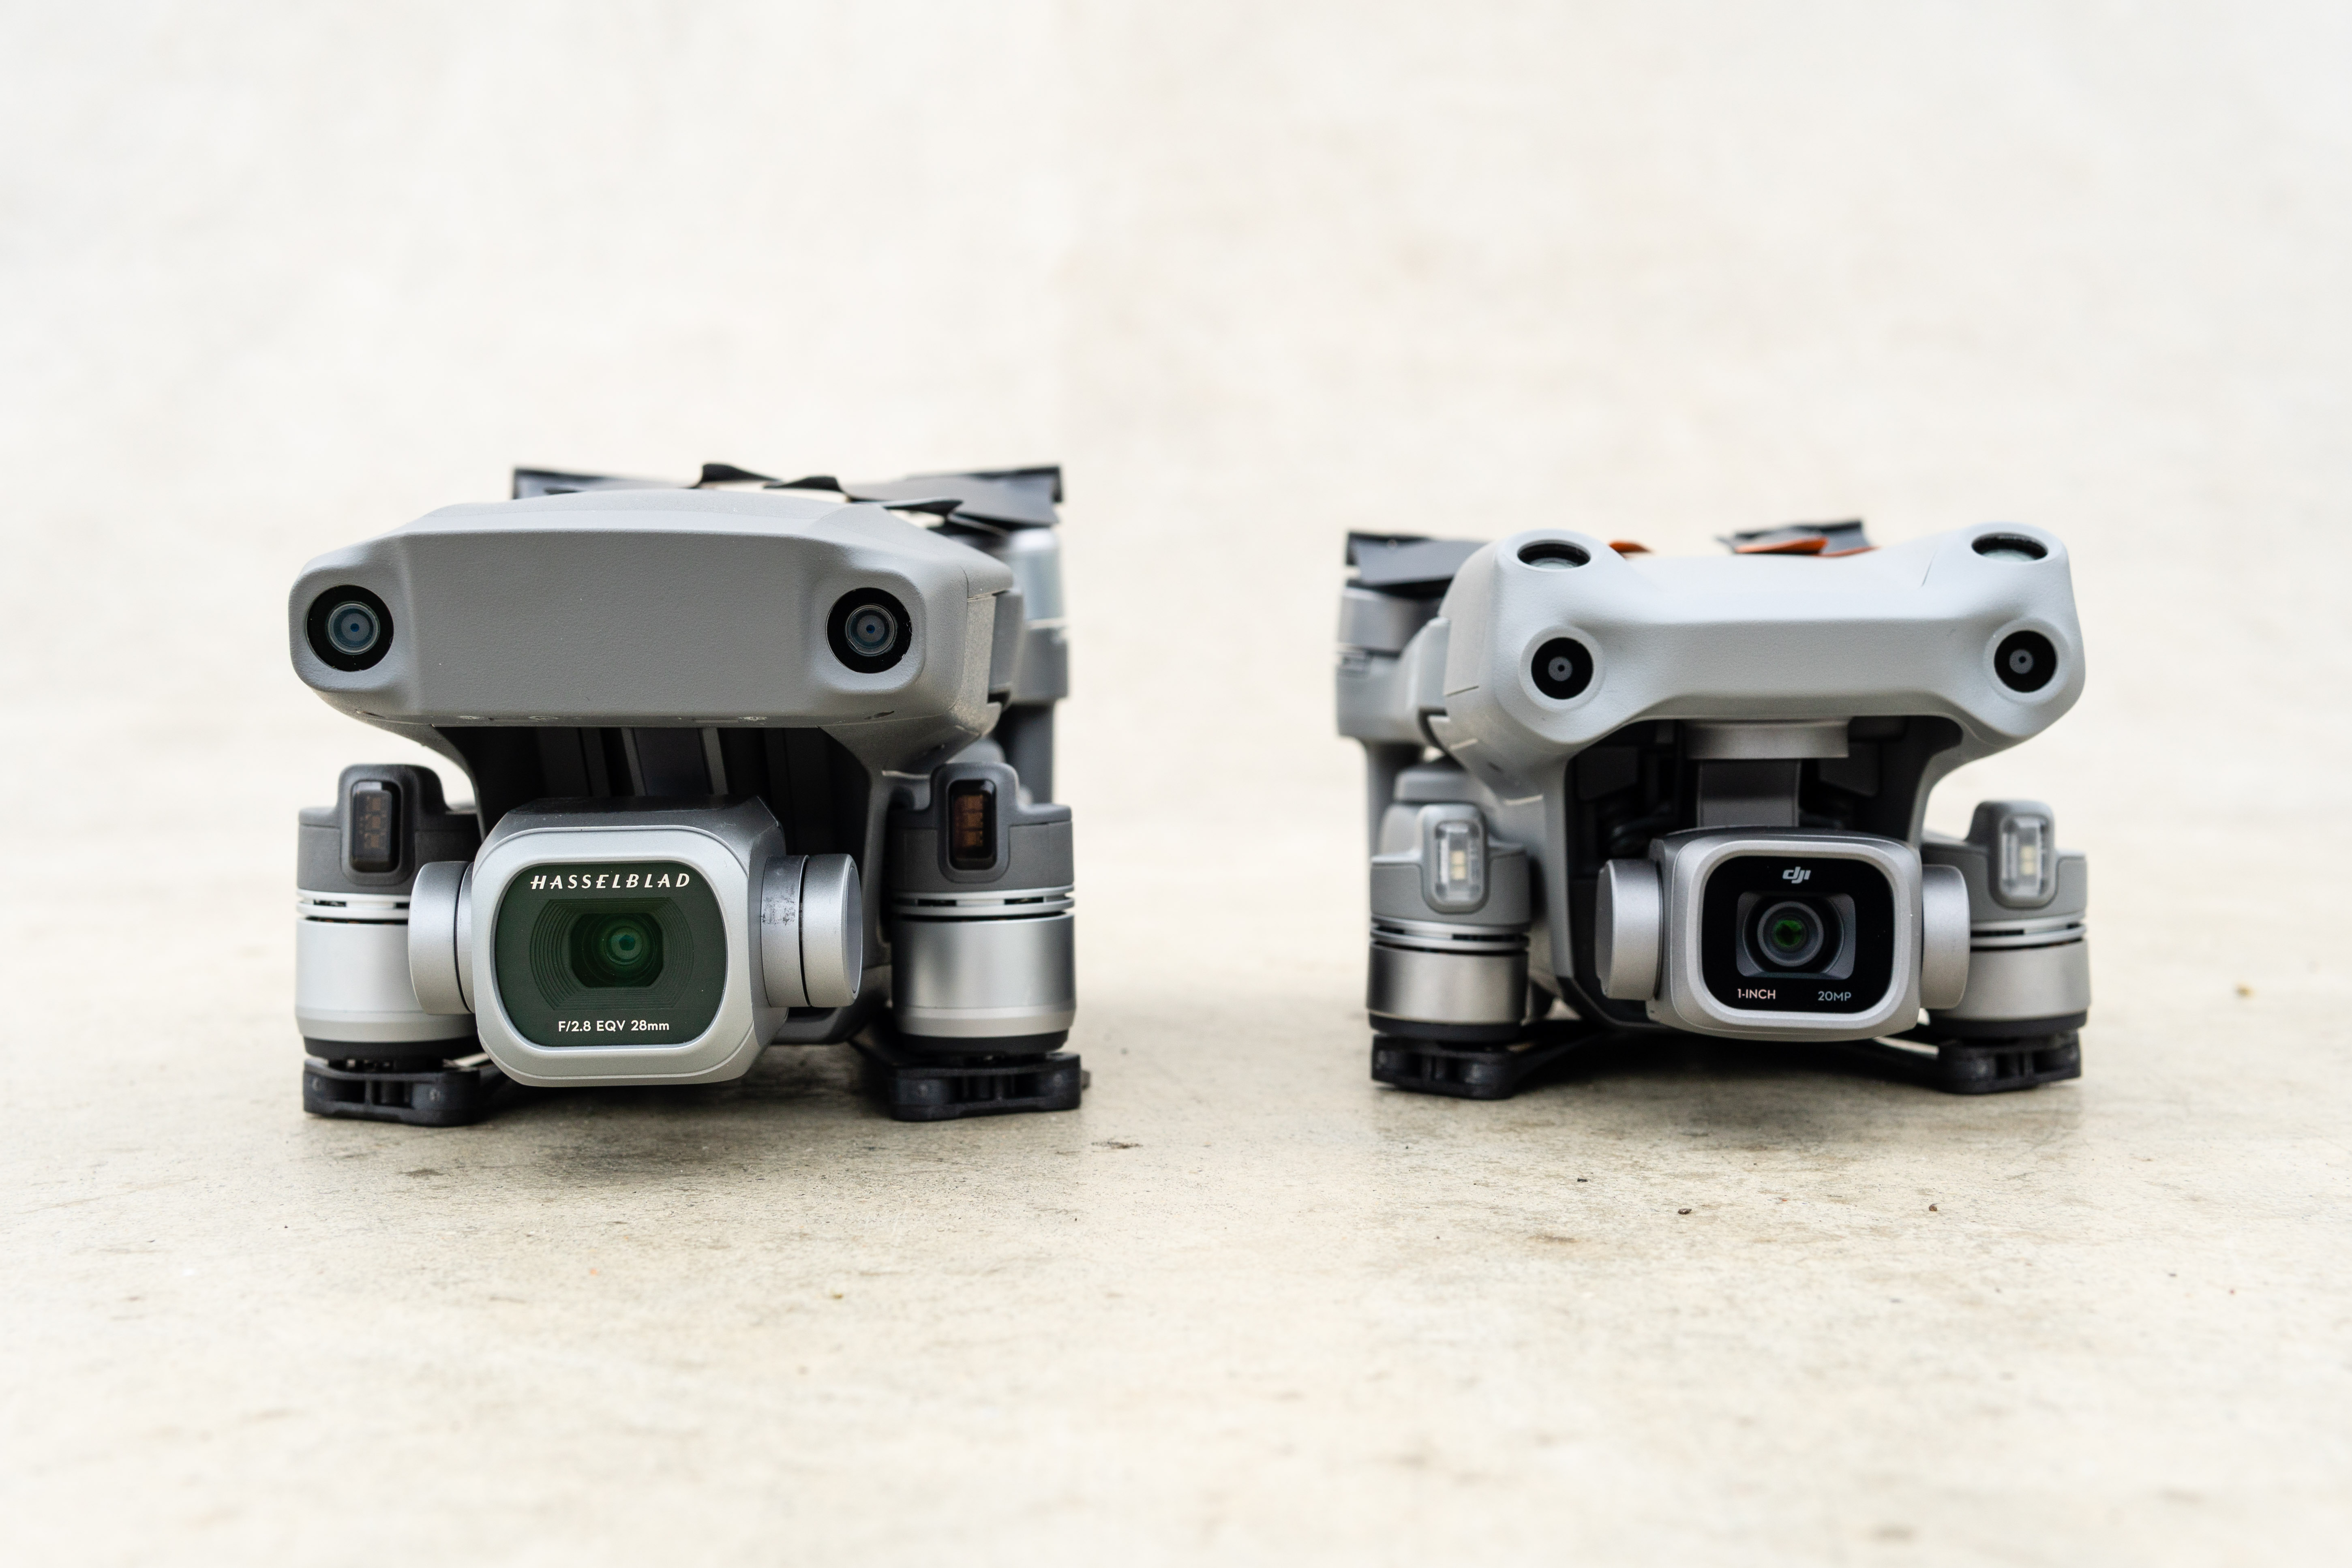 Parcel Appropriate peaceful DJI Air 2S vs DJI Mavic 2 Pro: which is the best drone for you? | TechRadar